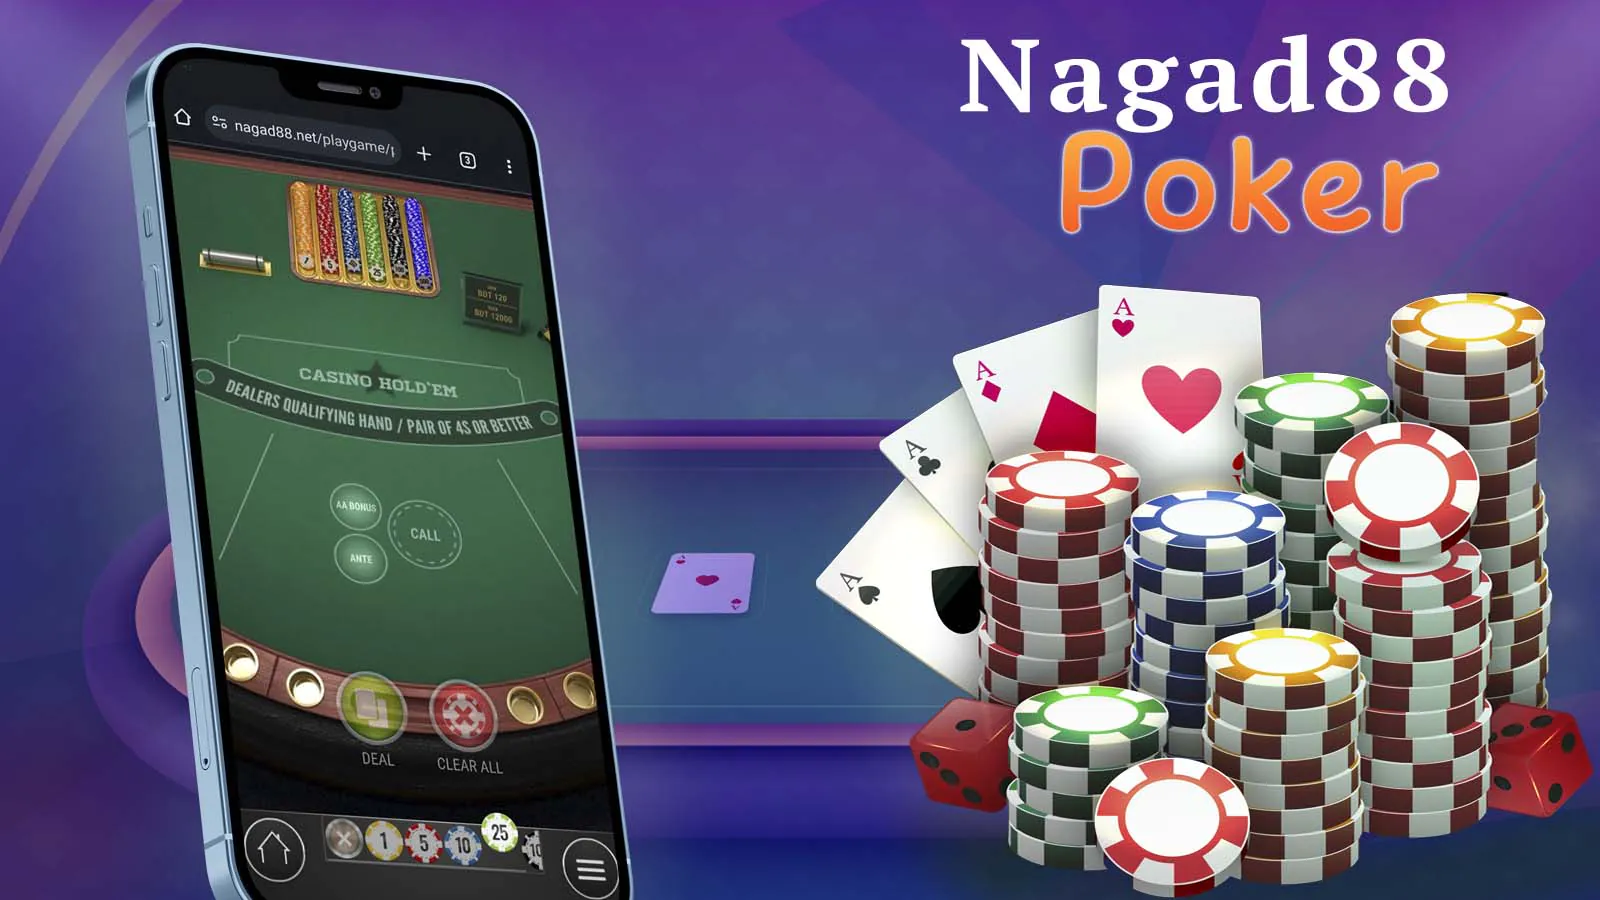 A wide variety of Nagad88 best poker games